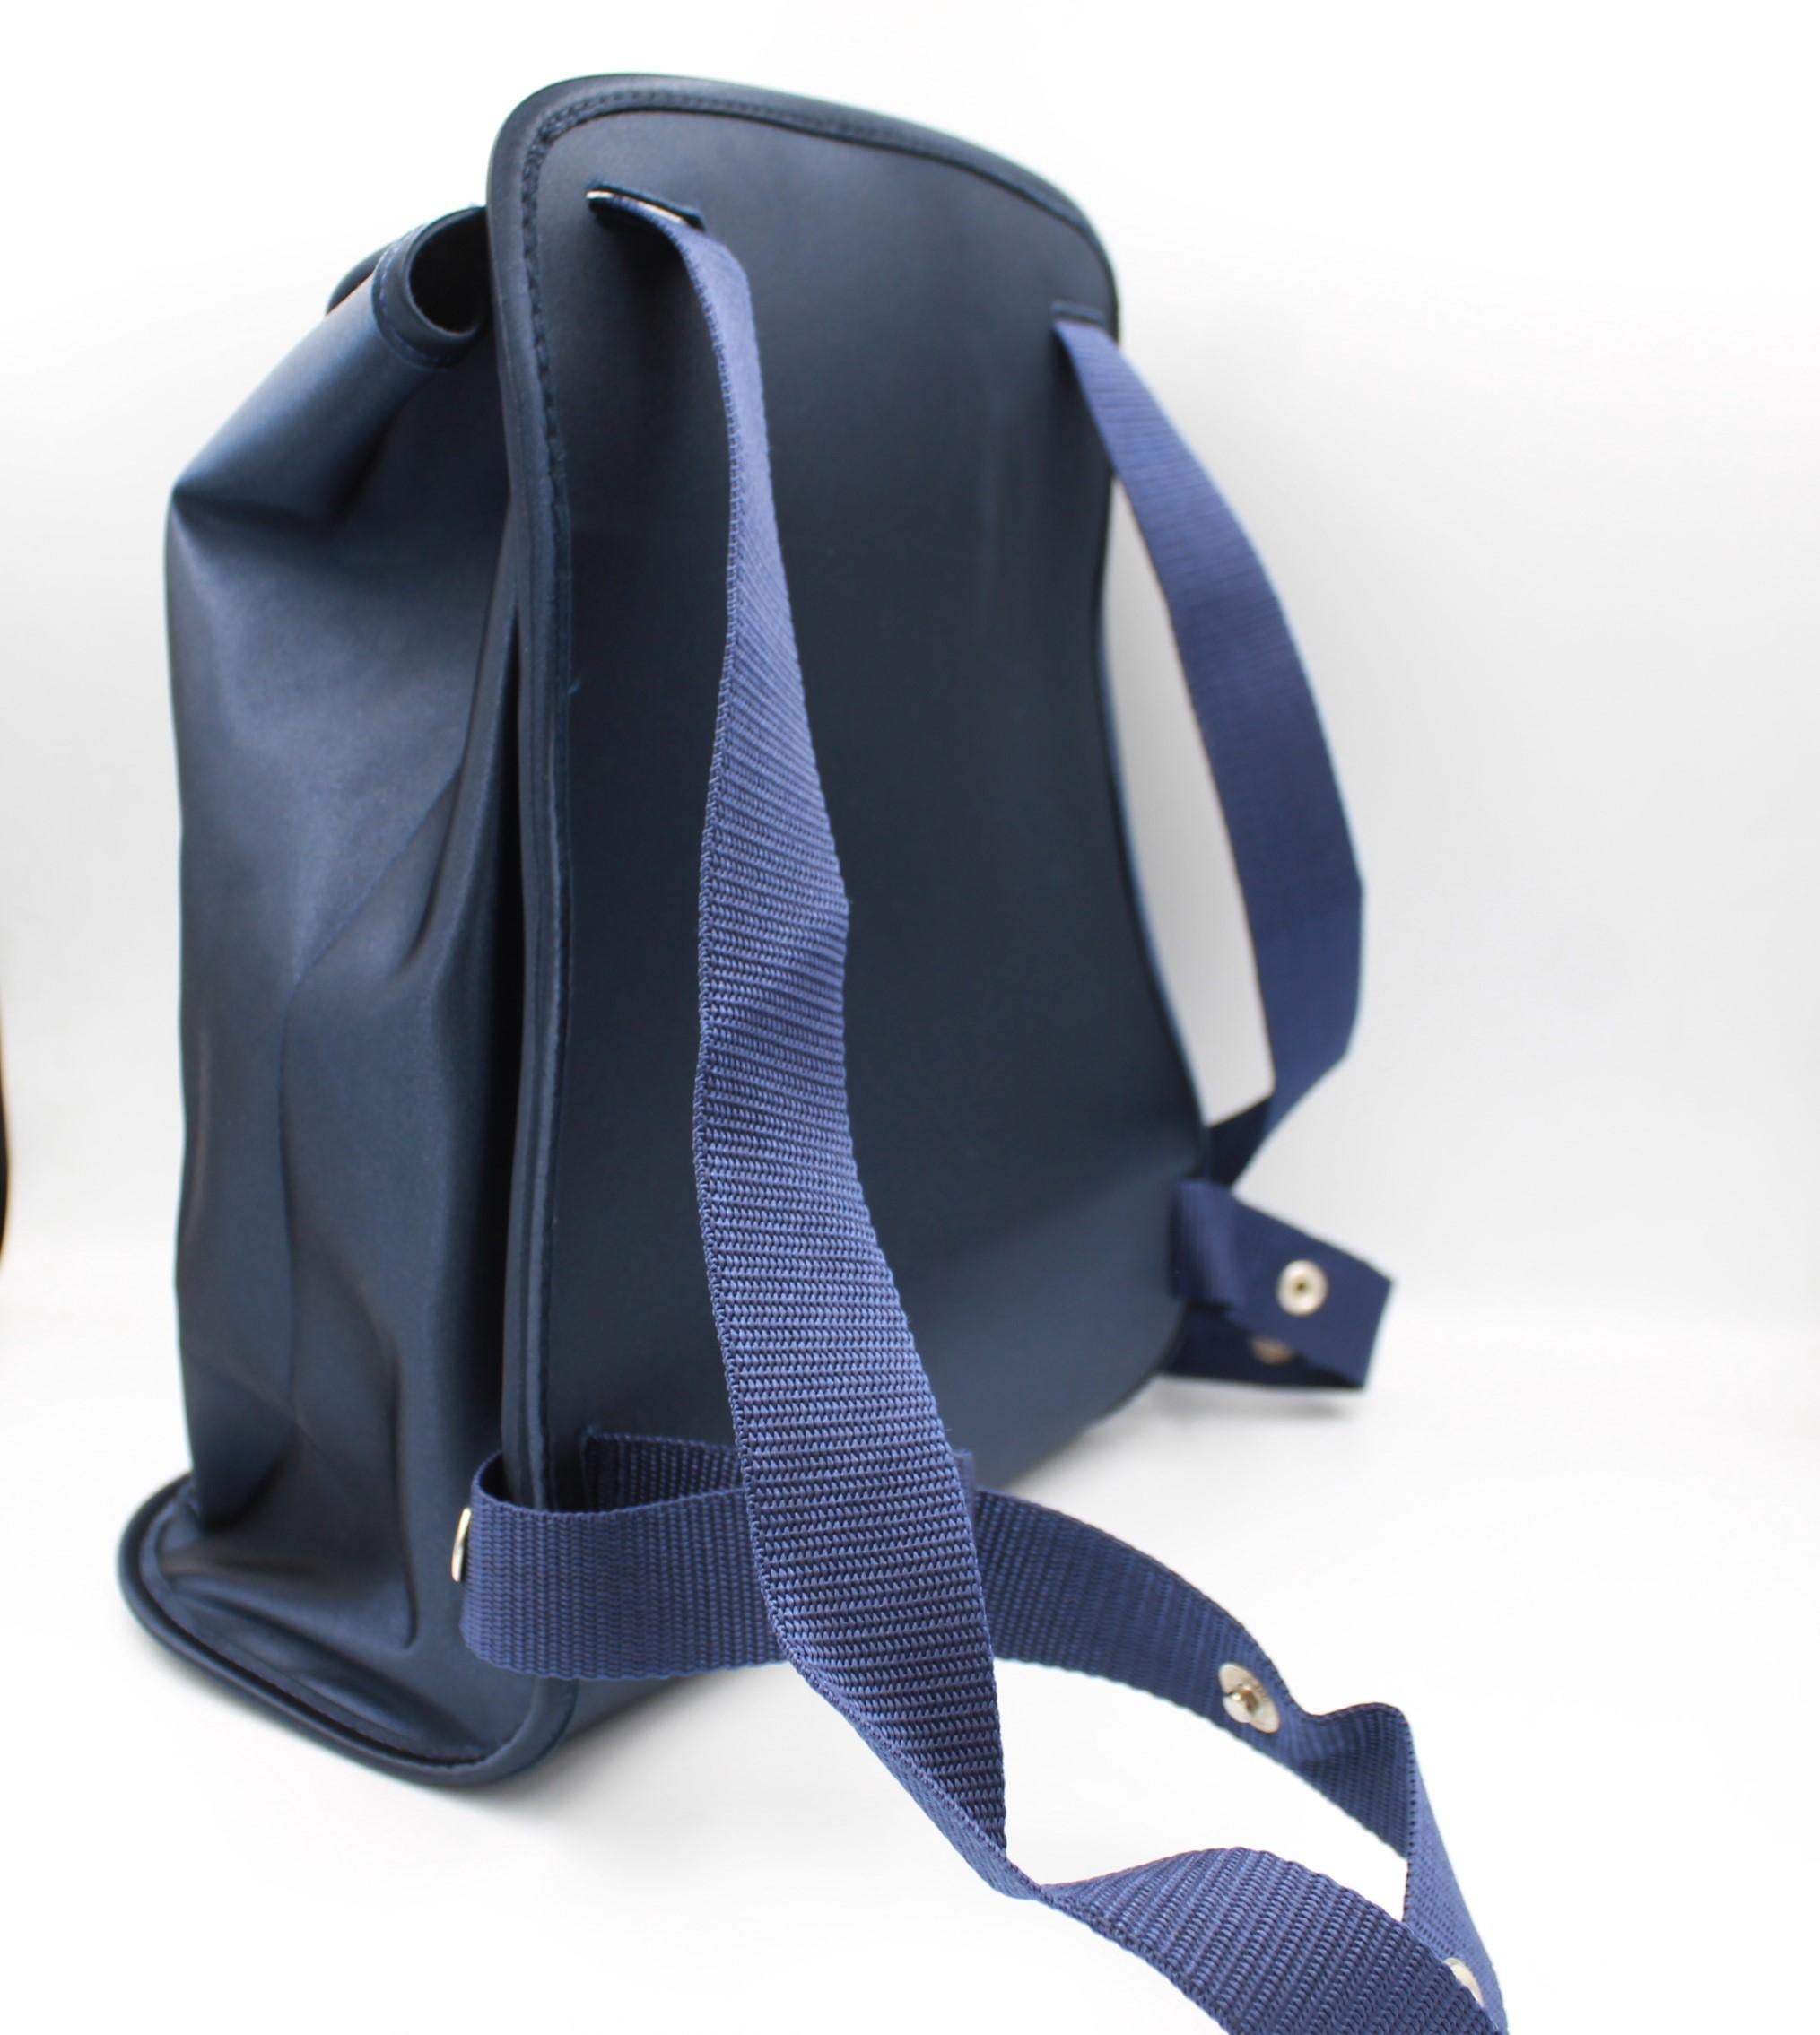 Hermès back pack in dark blue nylon.
Collector gift from Japan exposition. 
Good condition.
32cm x 28cm x 18cm
